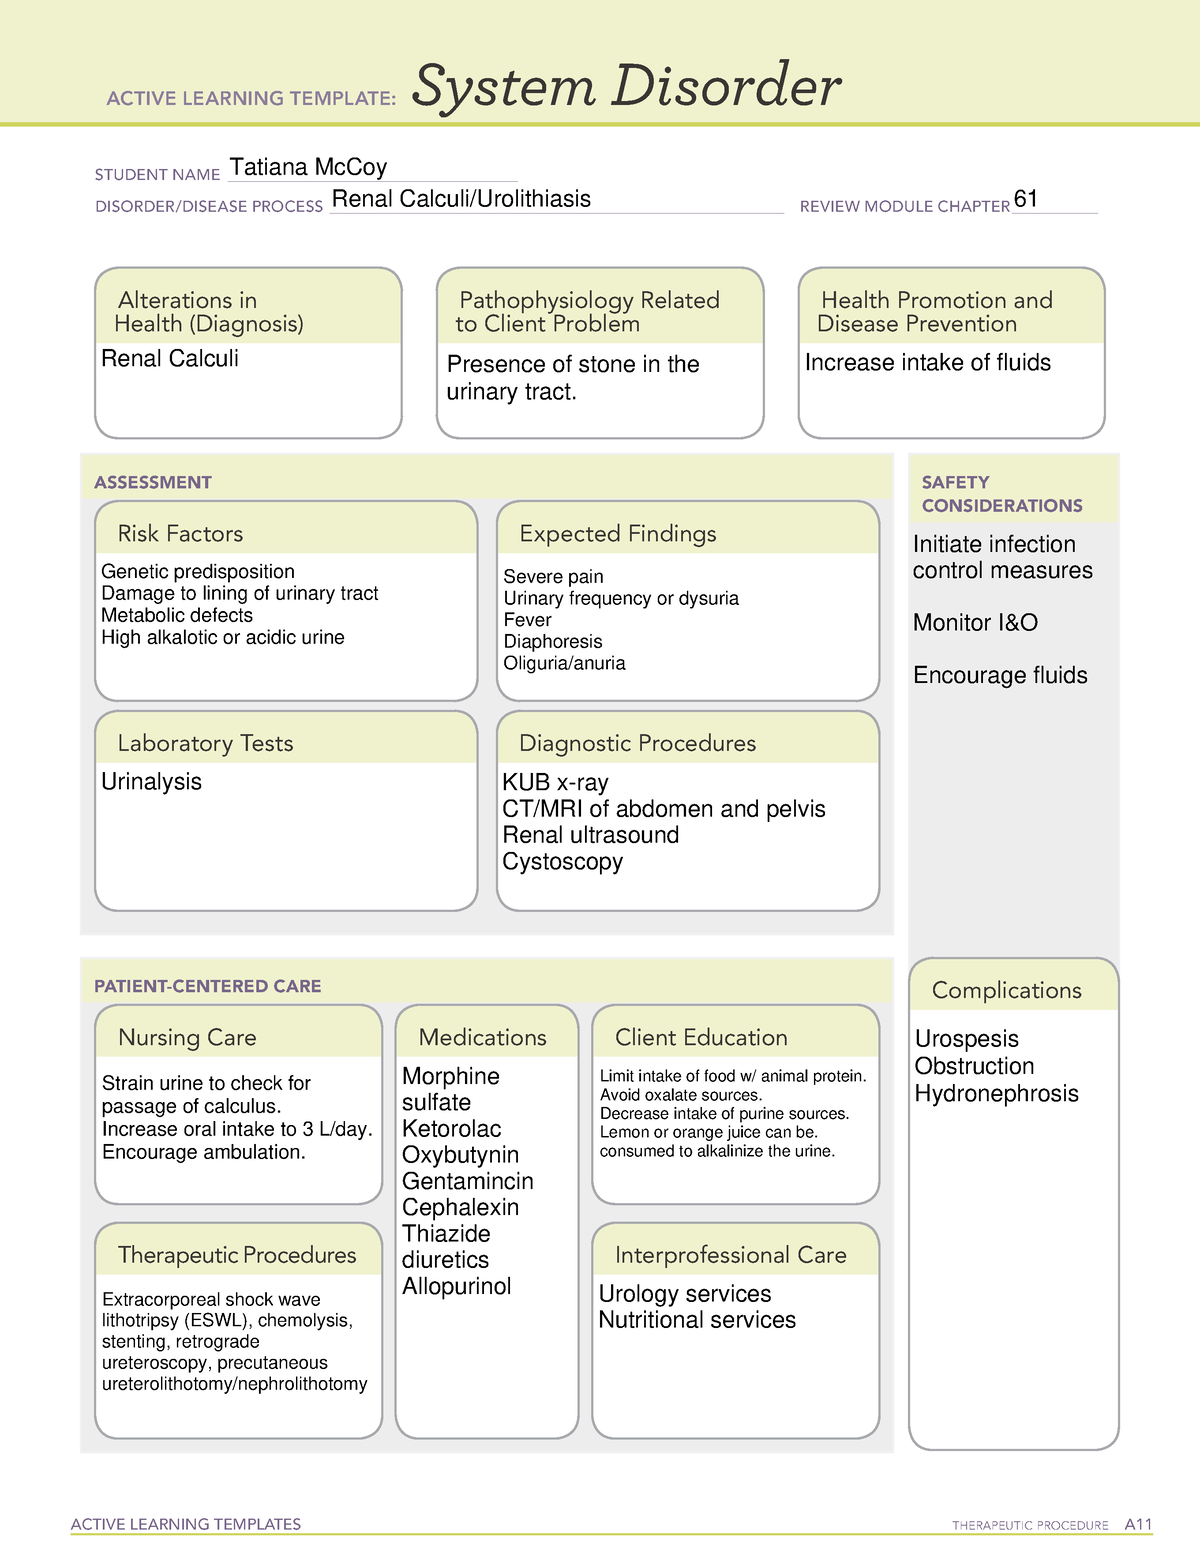 ALT System Disorder Renal Calculi ACTIVE LEARNING TEMPLATES